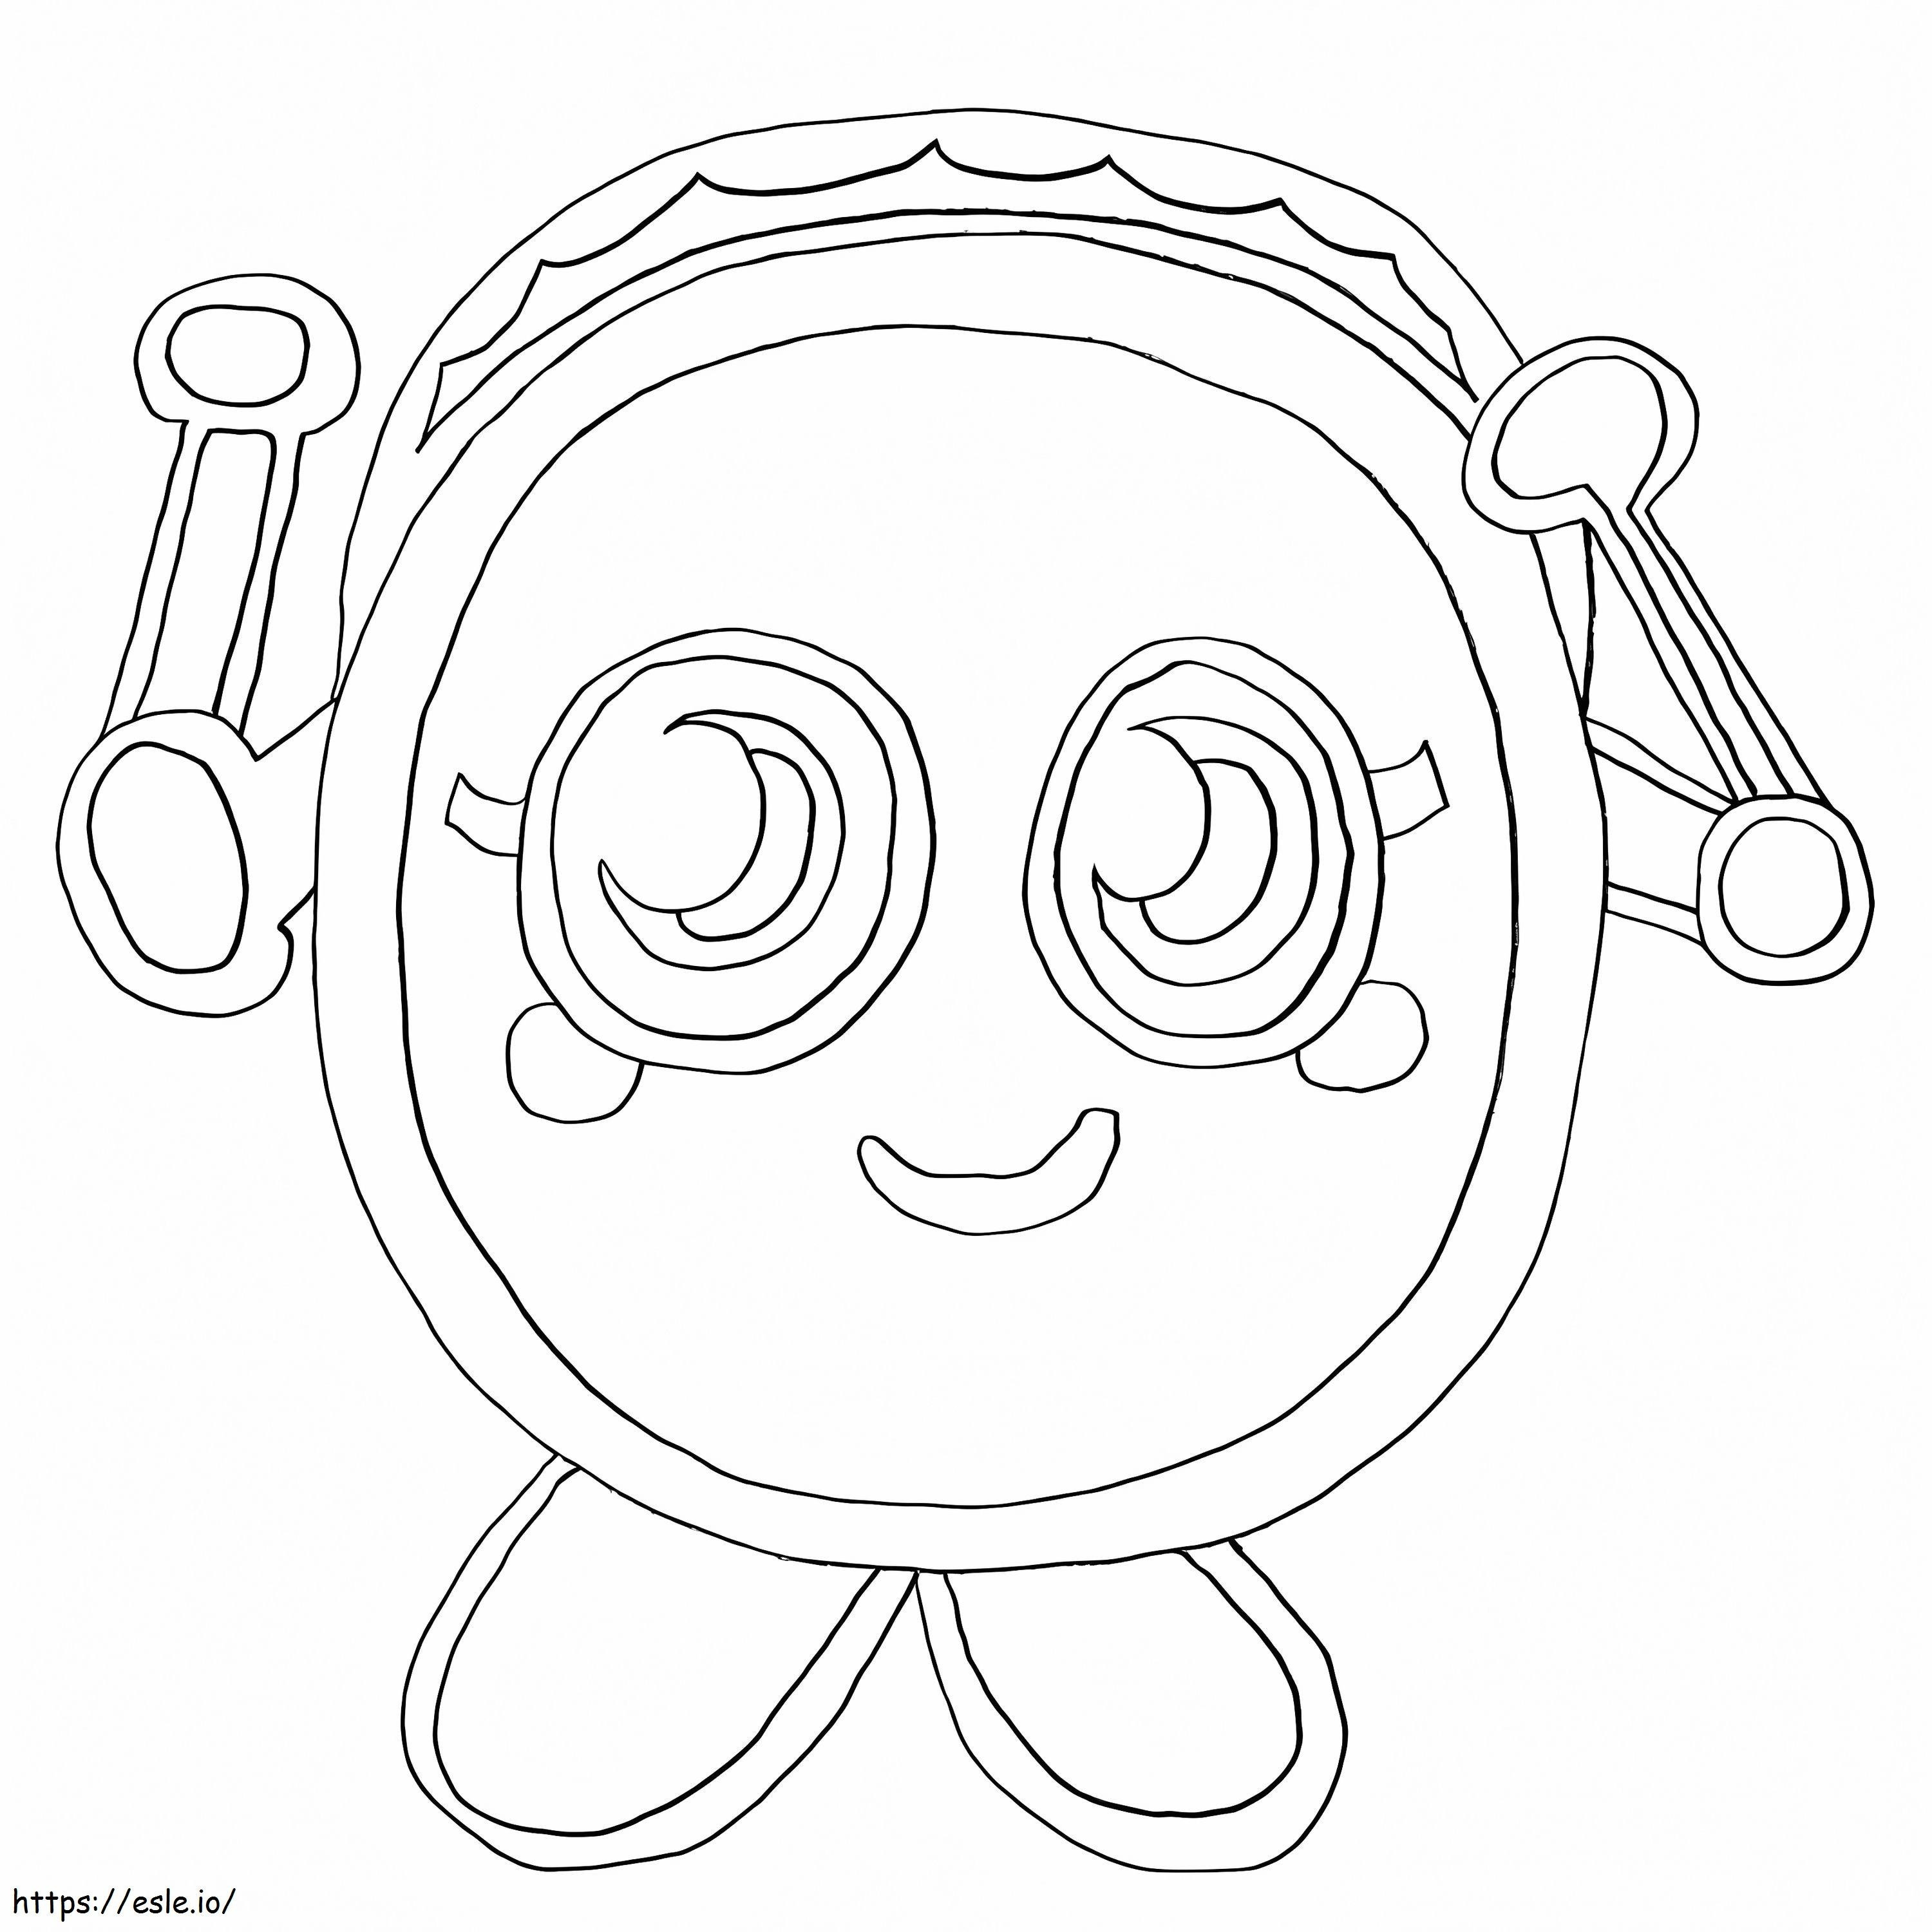 Cute Moshi Monsters coloring page